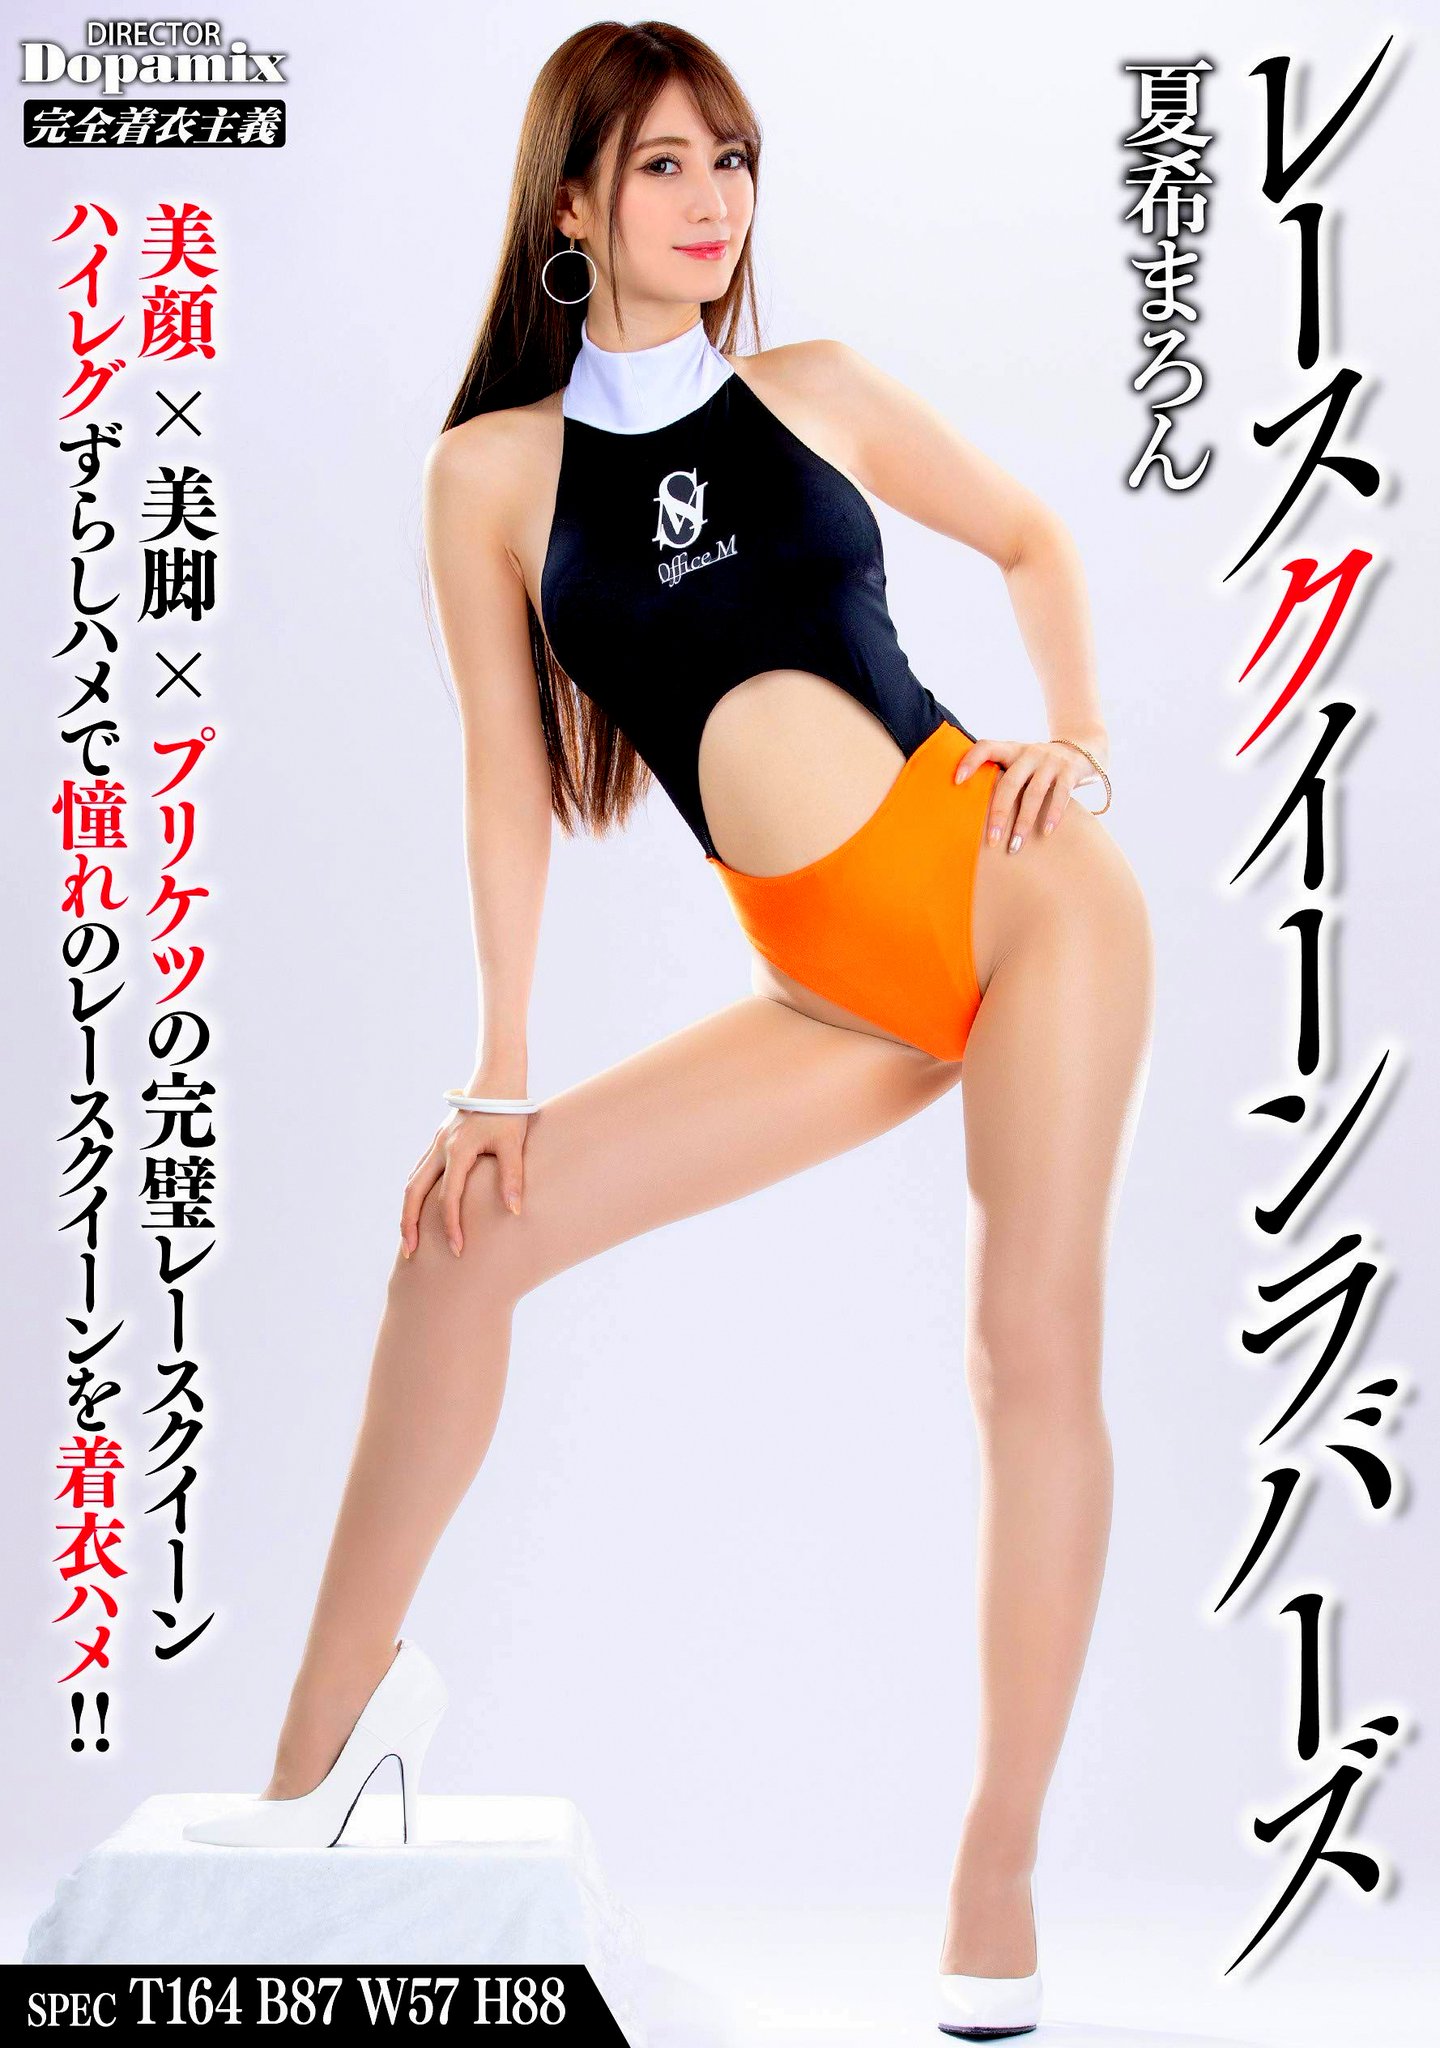 Transformers (당연심) on X: Maron Natsuki wearing racing model costume and  showing off her sexy long legs in cover photoshoot for Race Queen Lovers.  Happy Birthday Maron Natsuki (夏希まろん)!!! This movie was